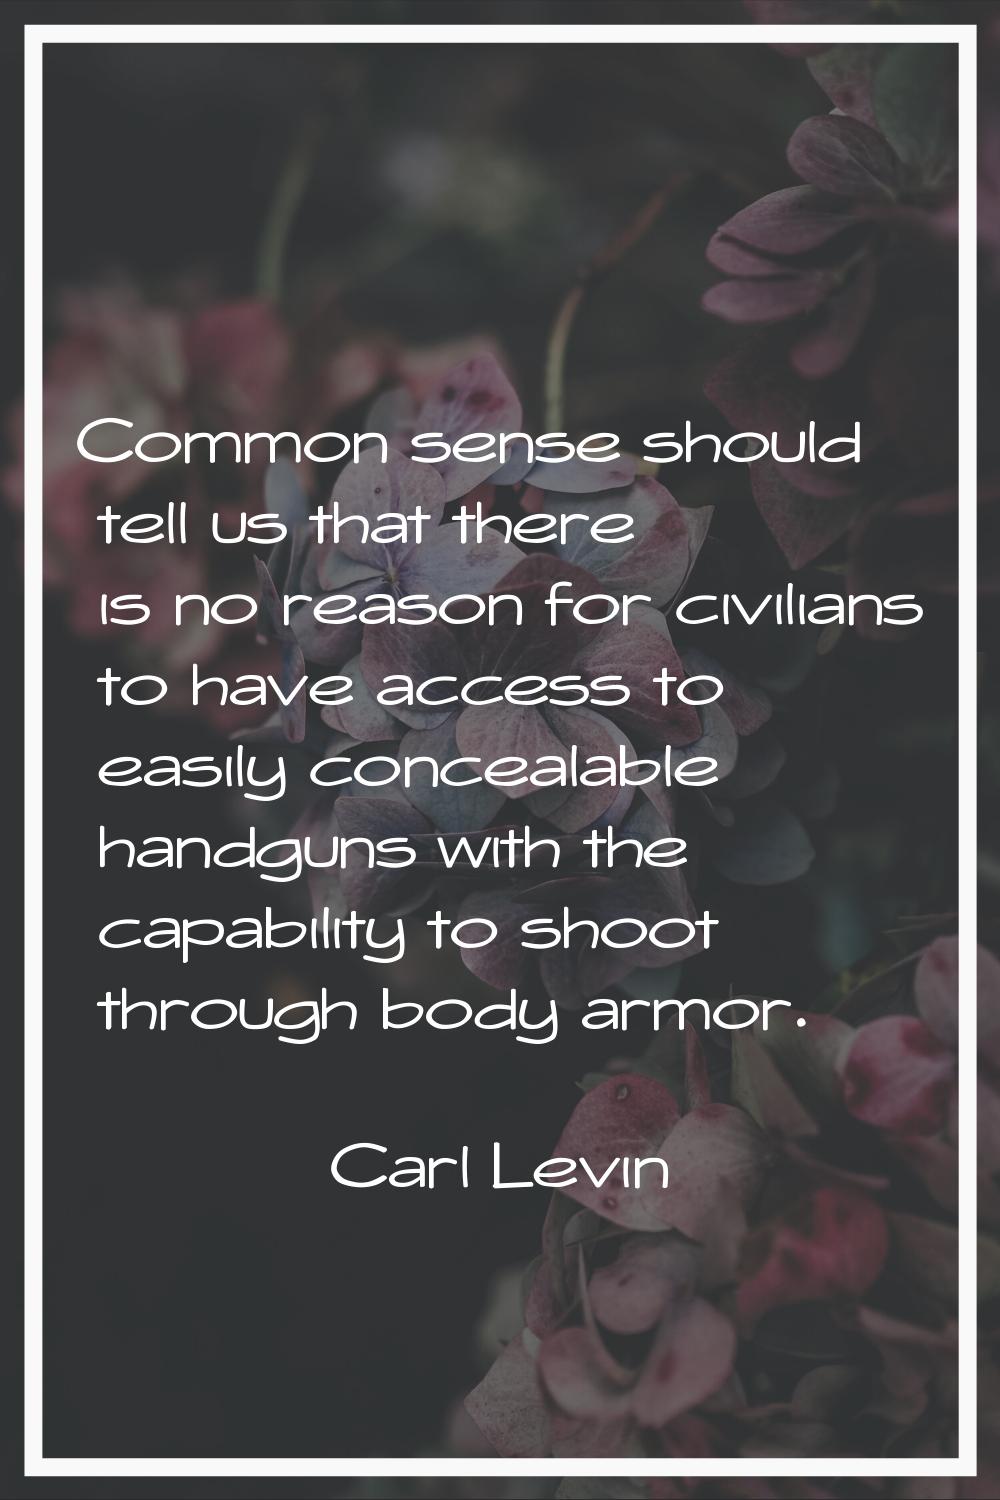 Common sense should tell us that there is no reason for civilians to have access to easily conceala